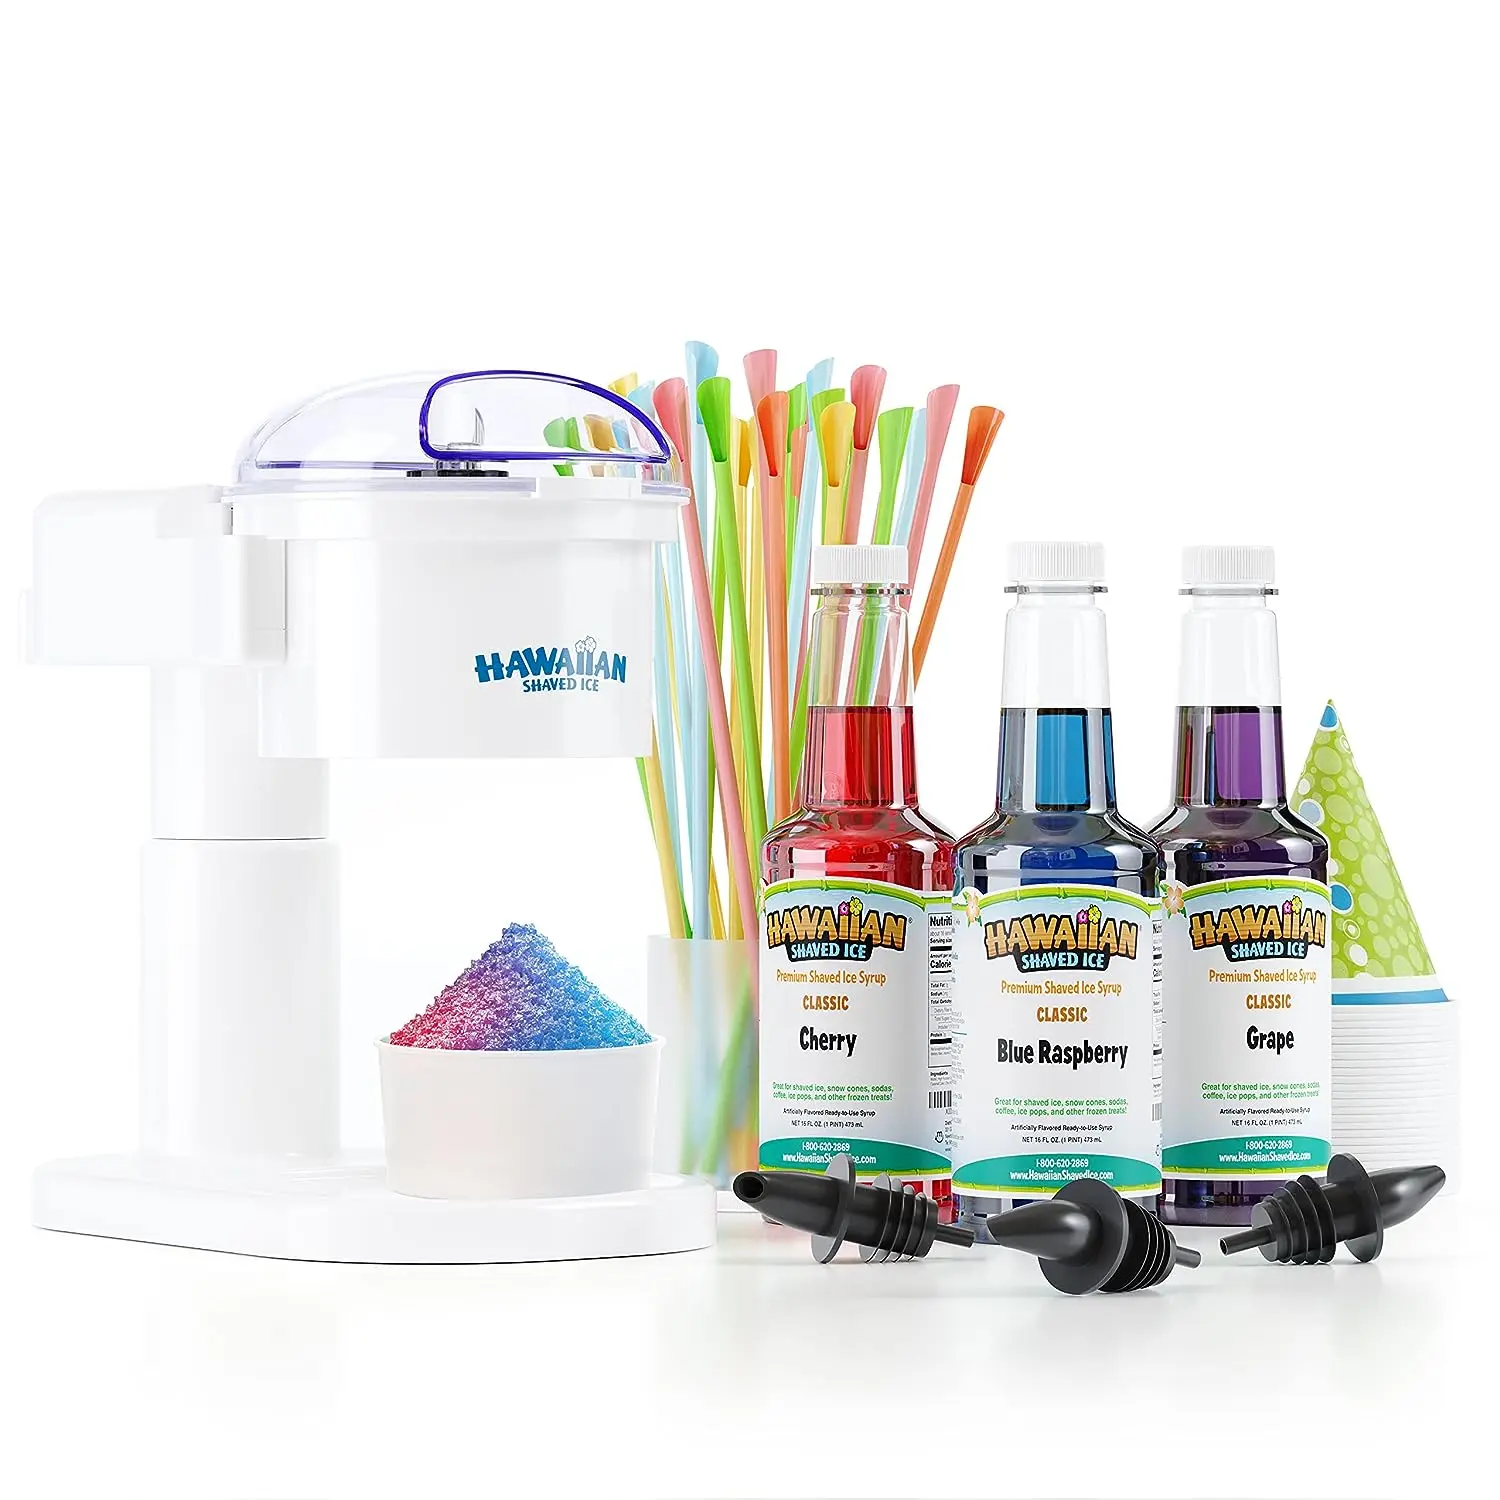 

Shaved Ice S700 Kid-Friendly Snow Cone Machine Kit with 3 - 16oz. Syrup Flavors Cherry, Grape, and Blue Raspberry, Plus 25 Snow